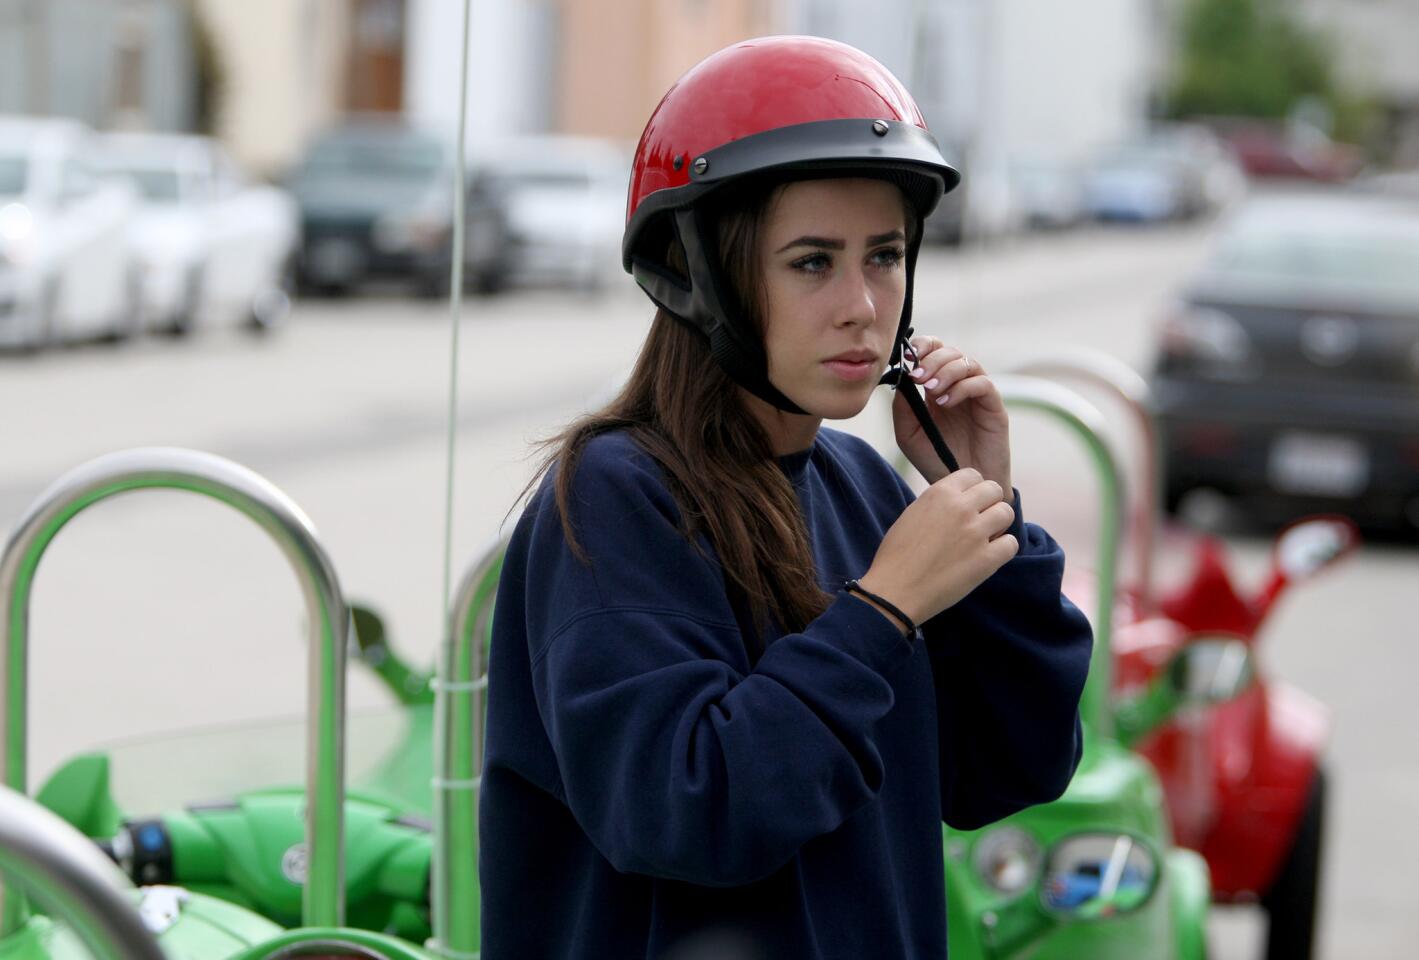 Taylor Kenney, 22 of Los Angeles, puts her helmet on before a three-hour, Red Carpet tour offered by Burbank-based Sunnyday Scoot on Friday, June 5, 2015.